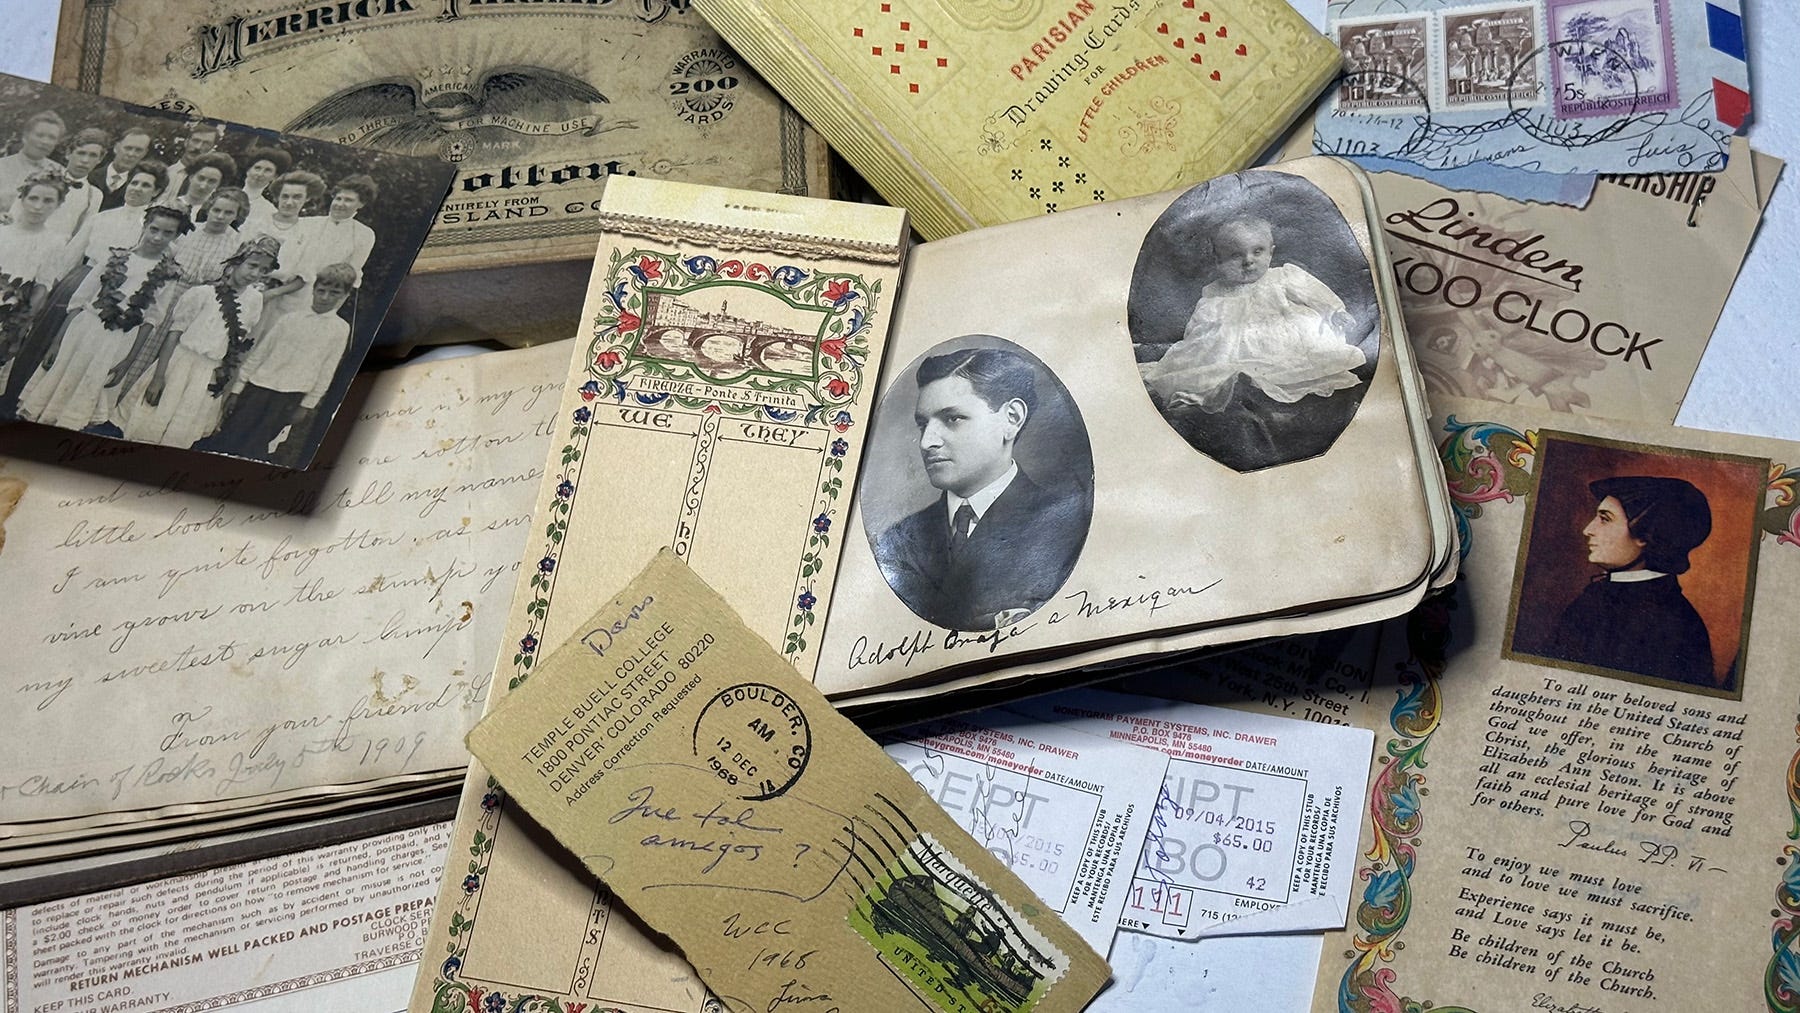 Photo of a pile of paper ephemera, including old photos, cards, receipts and such, many from over 100 years ago